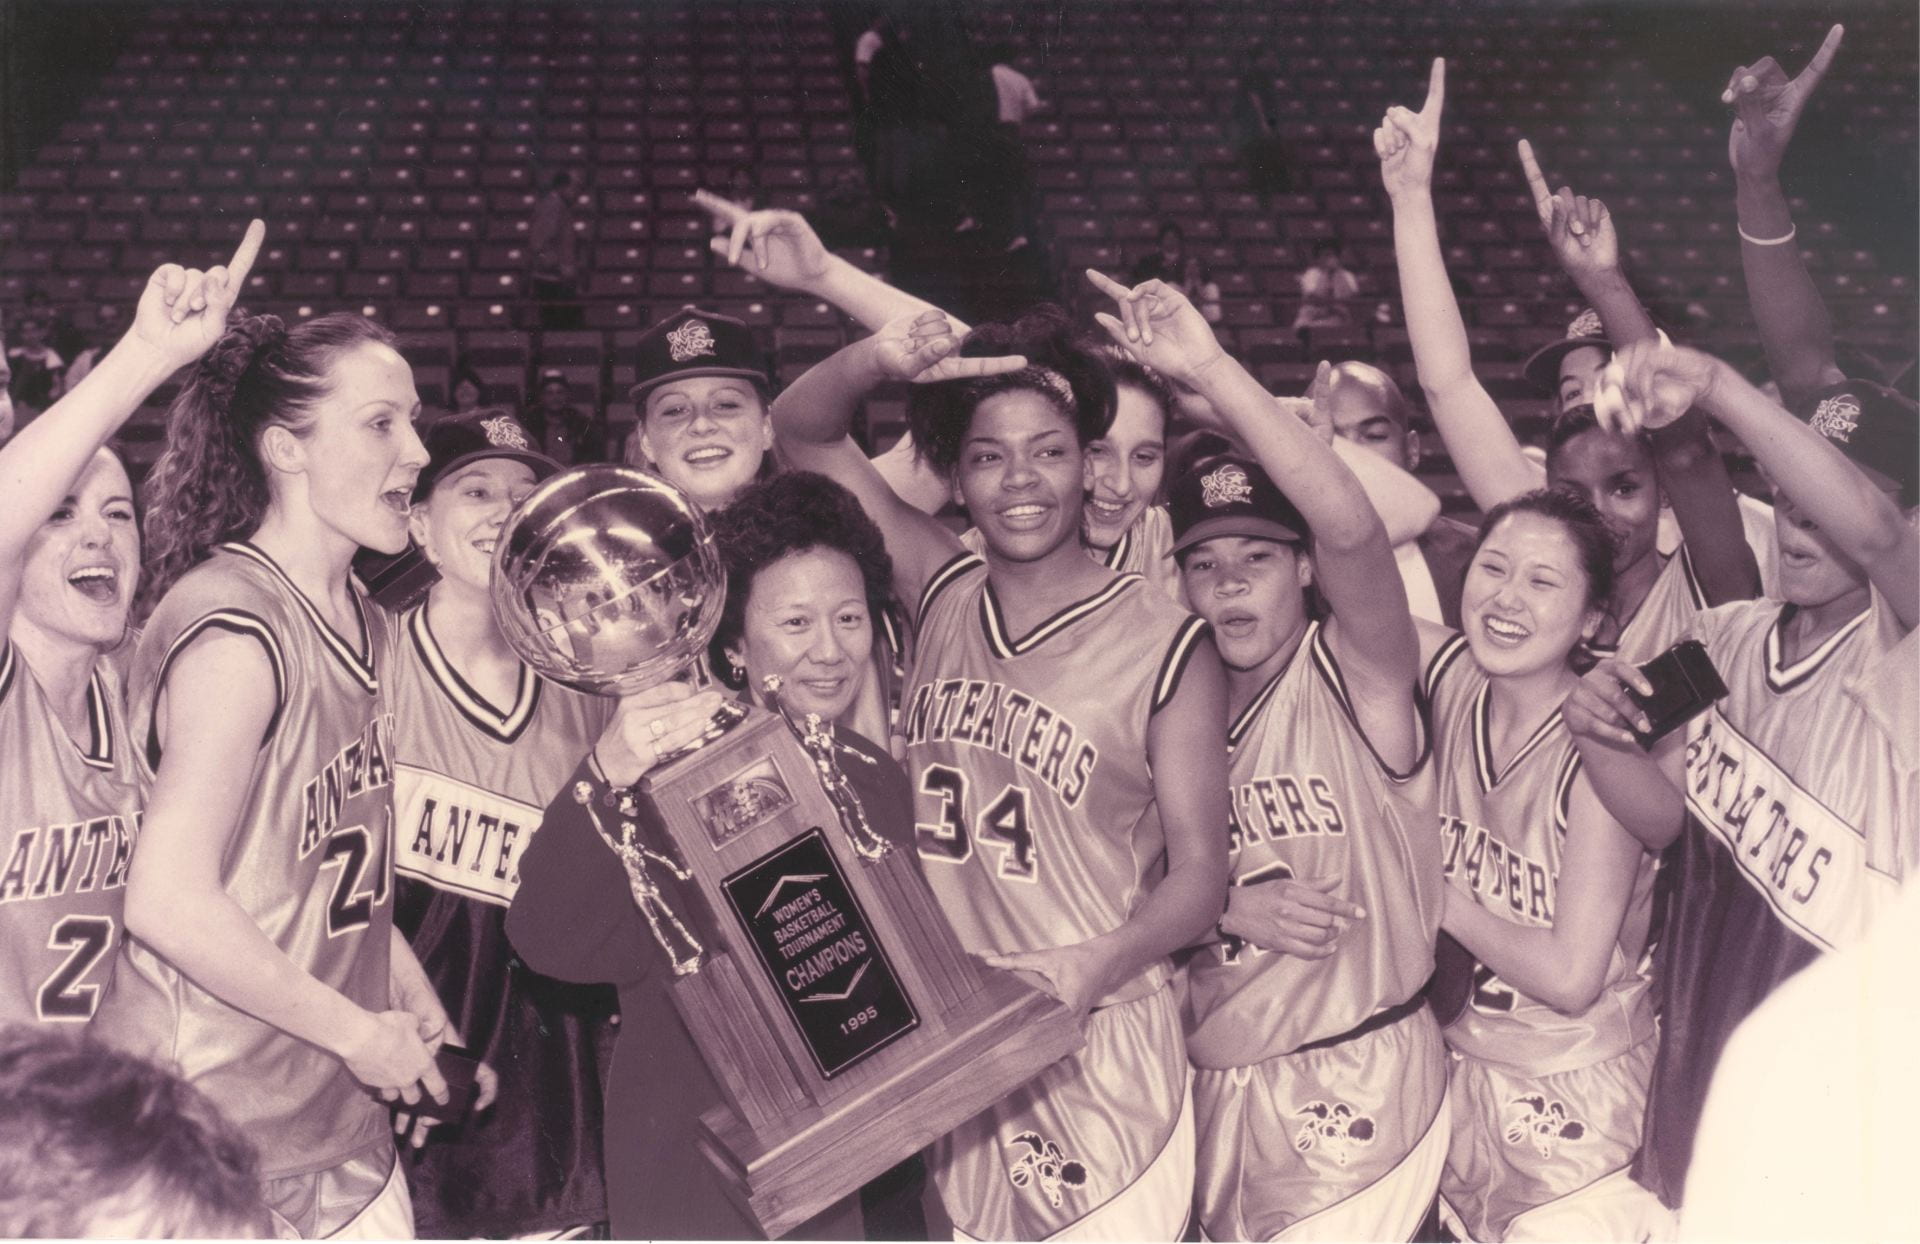 The 1995 UCI women's basketball team celebrating their Big West Tournament win.